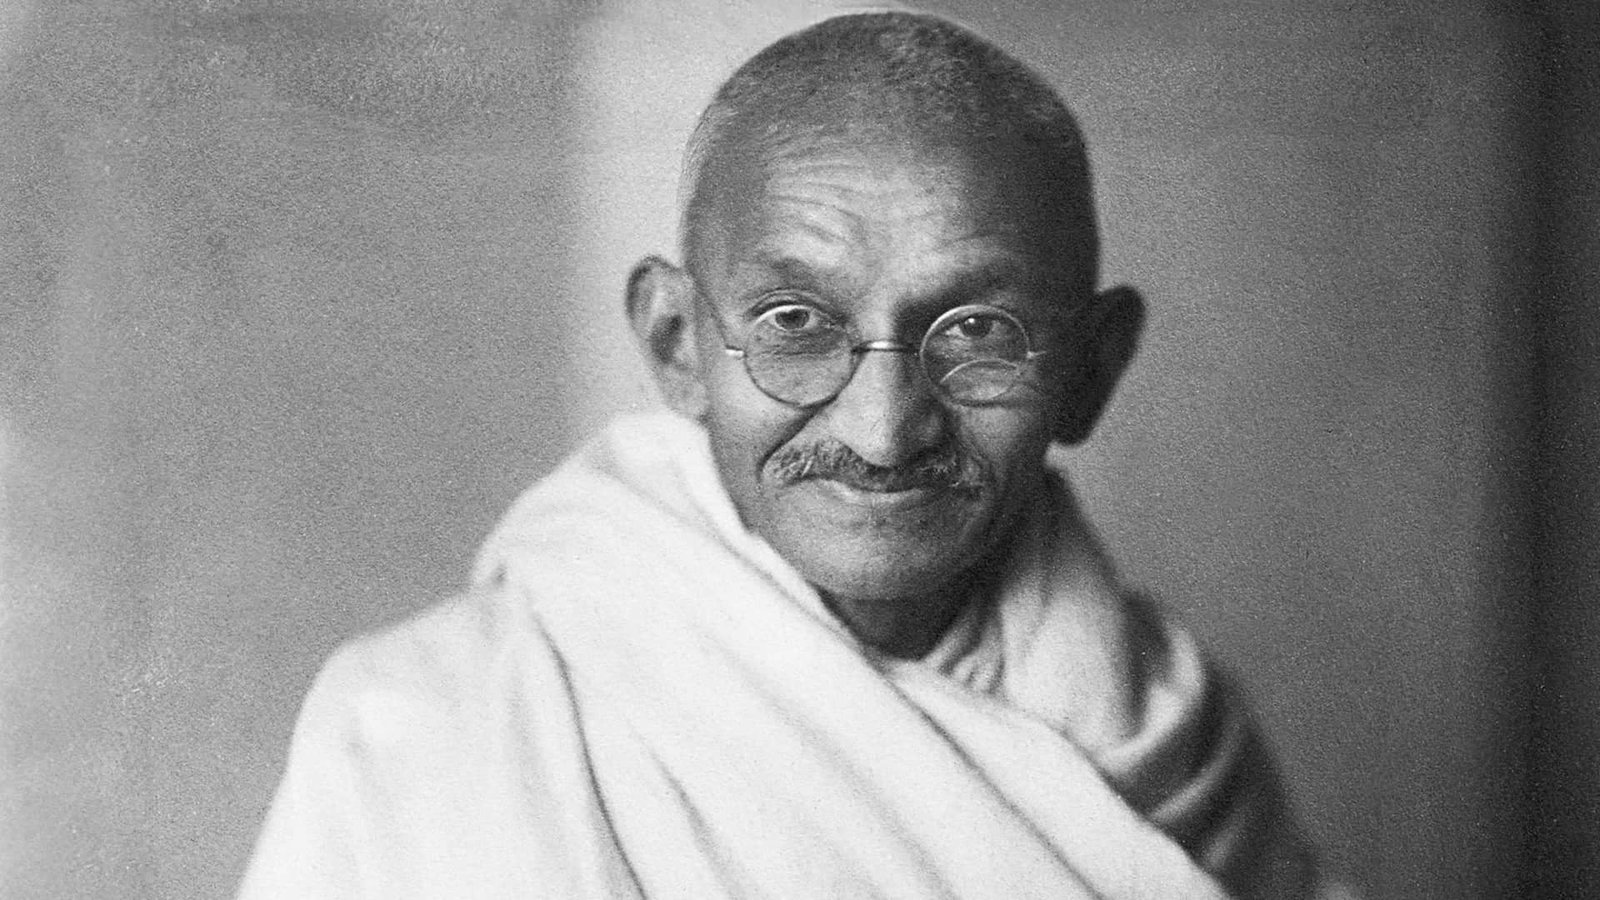 Important Events in the Life of Mahatma Gandhi